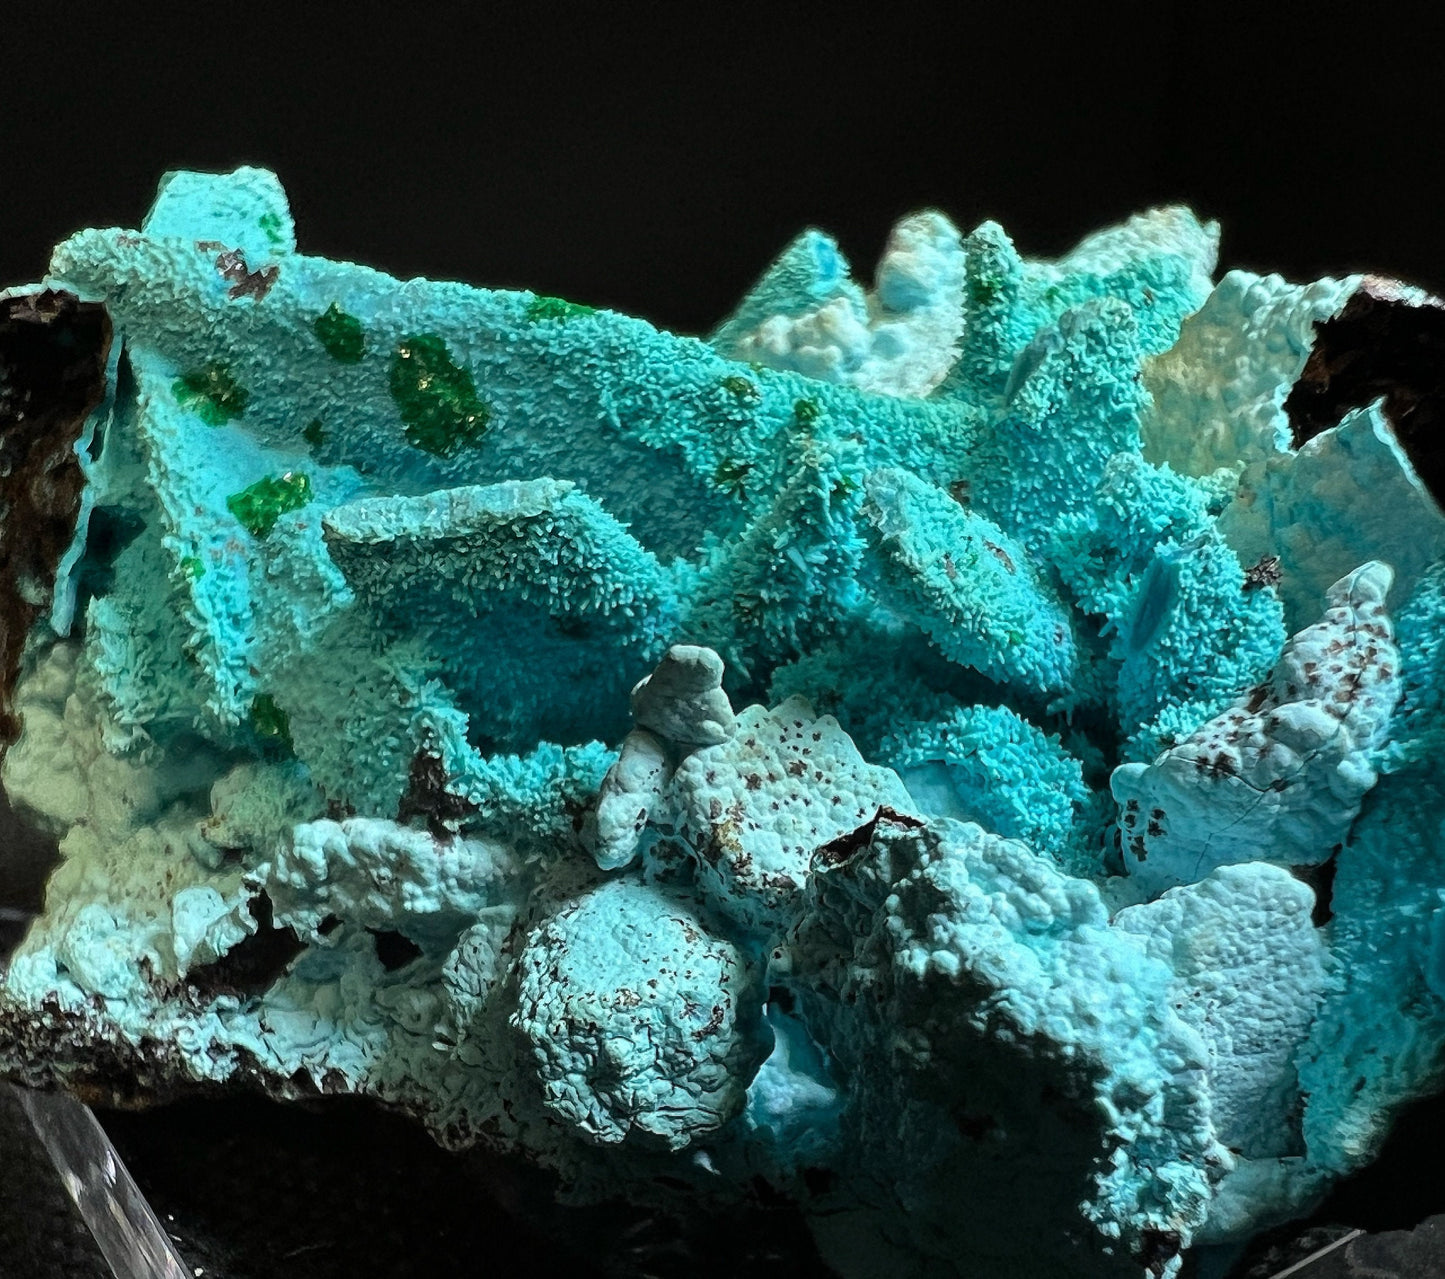 Chrysocolla Pseudomorph From Tenke Fungurume, Kolweze, Dr Congo- Collectors Piece, Statement Piece, Home Décor, Gift (Stand Included)